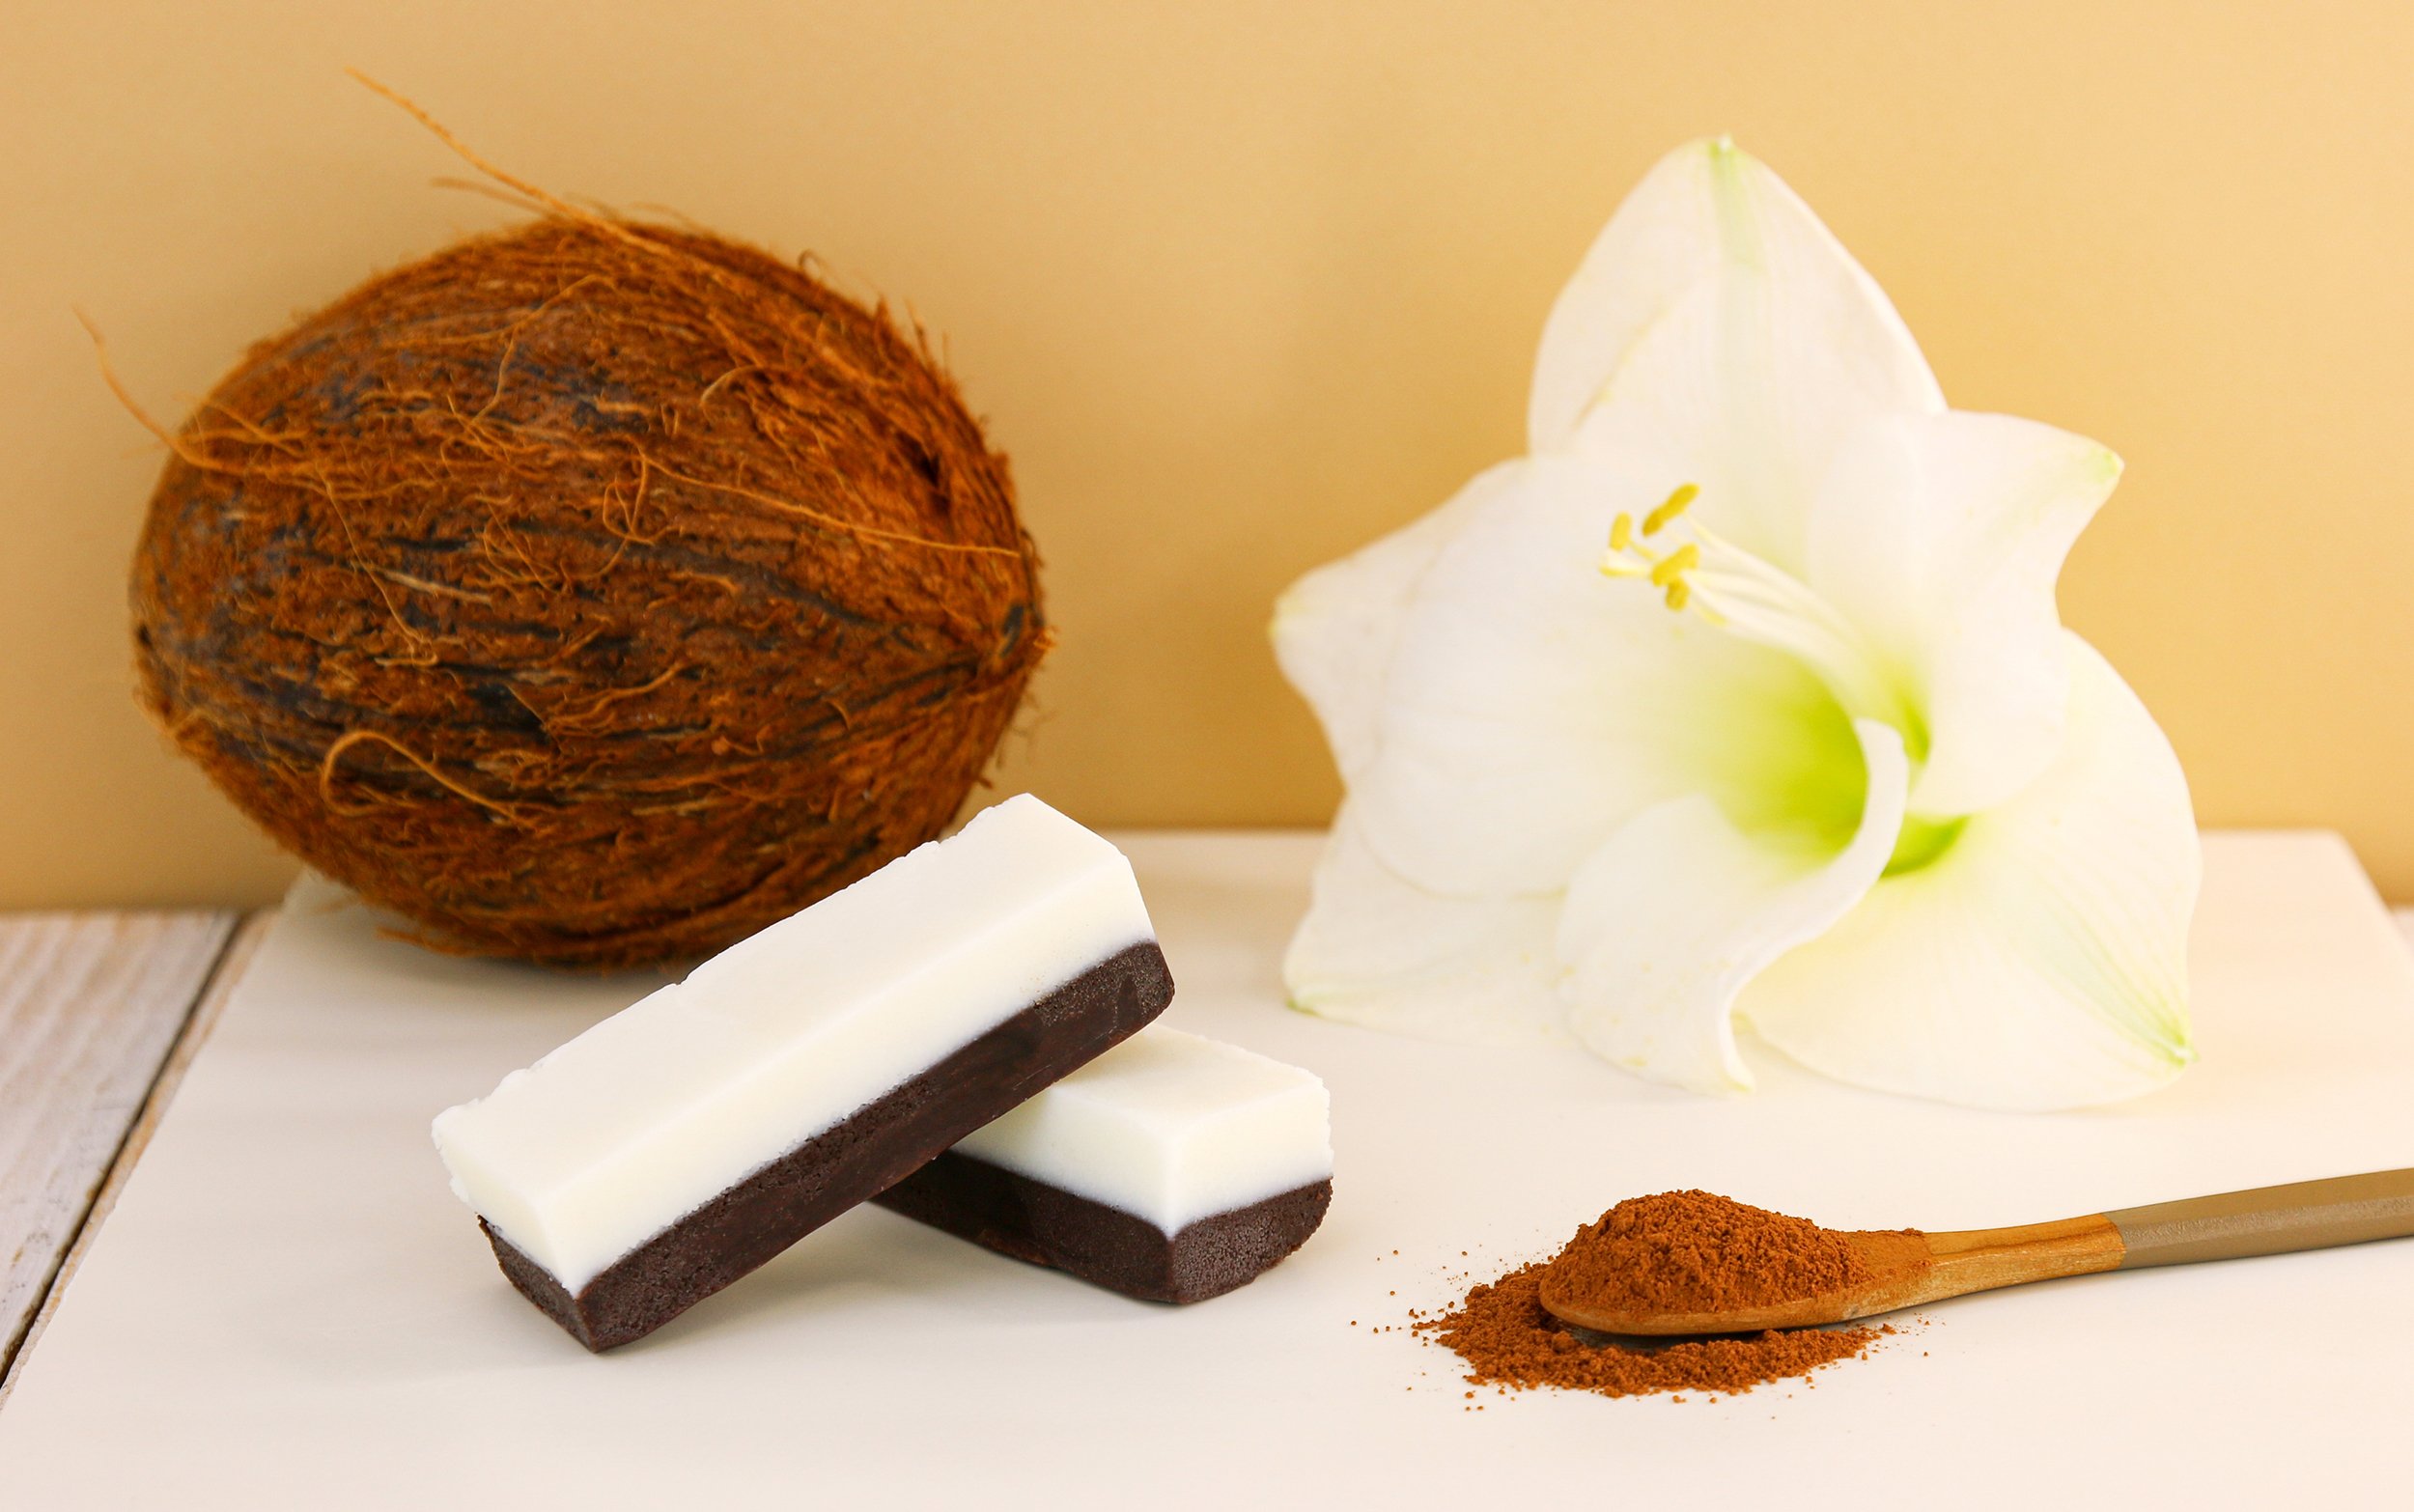 Soins solides pour le corps "Choco & Coco"